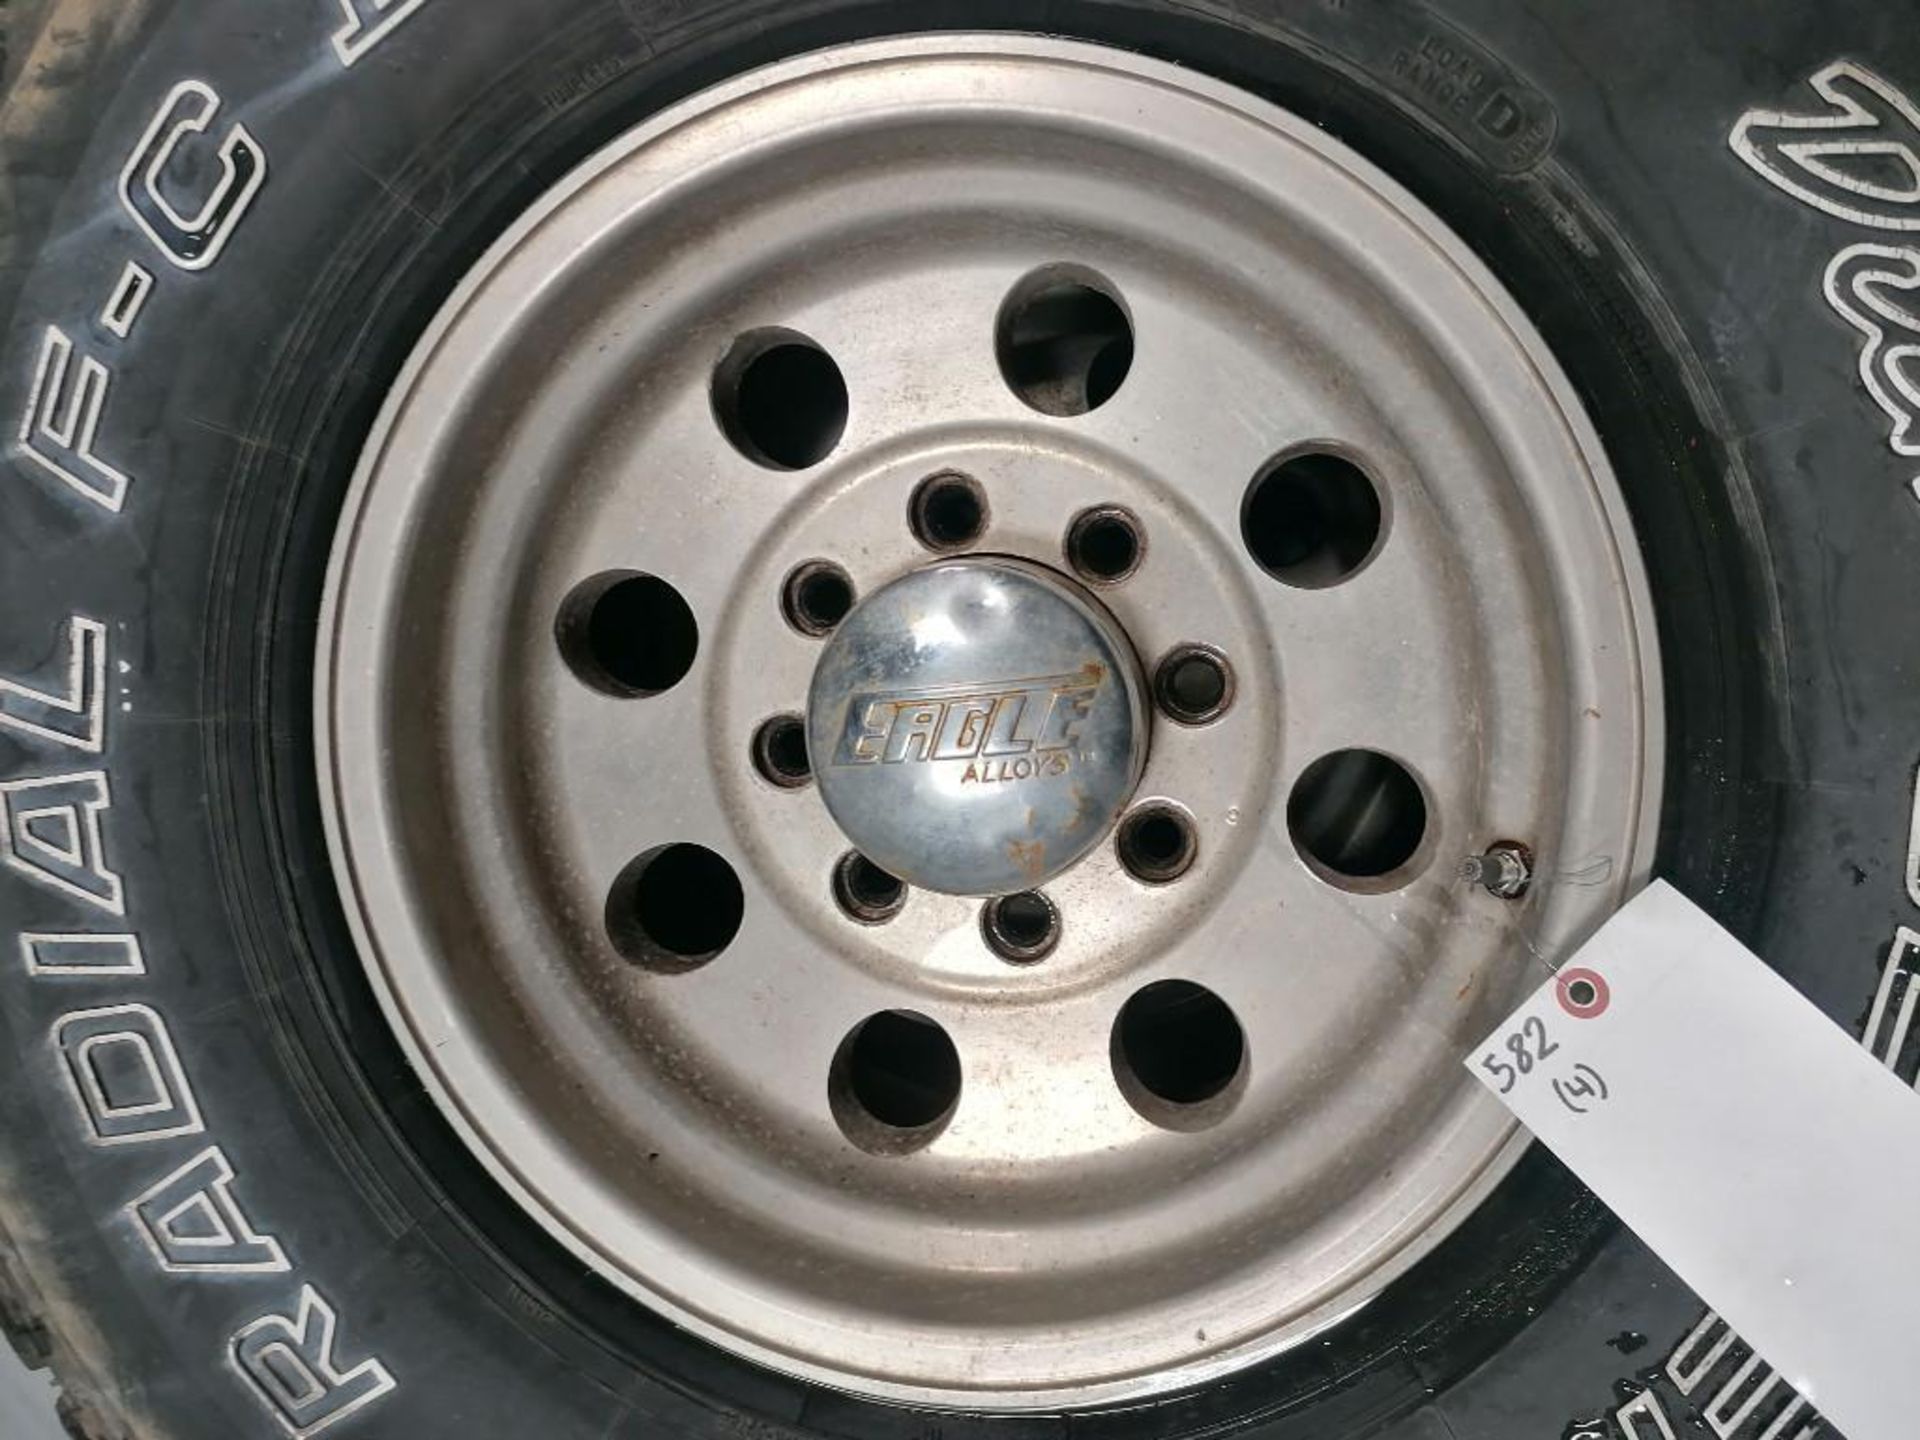 (4) Dick CEPEX Radial F-C II LT315 / 75 R16 Tires with 8 Hole Pattern Rims. Located in Mt. Pleasant, - Image 7 of 10